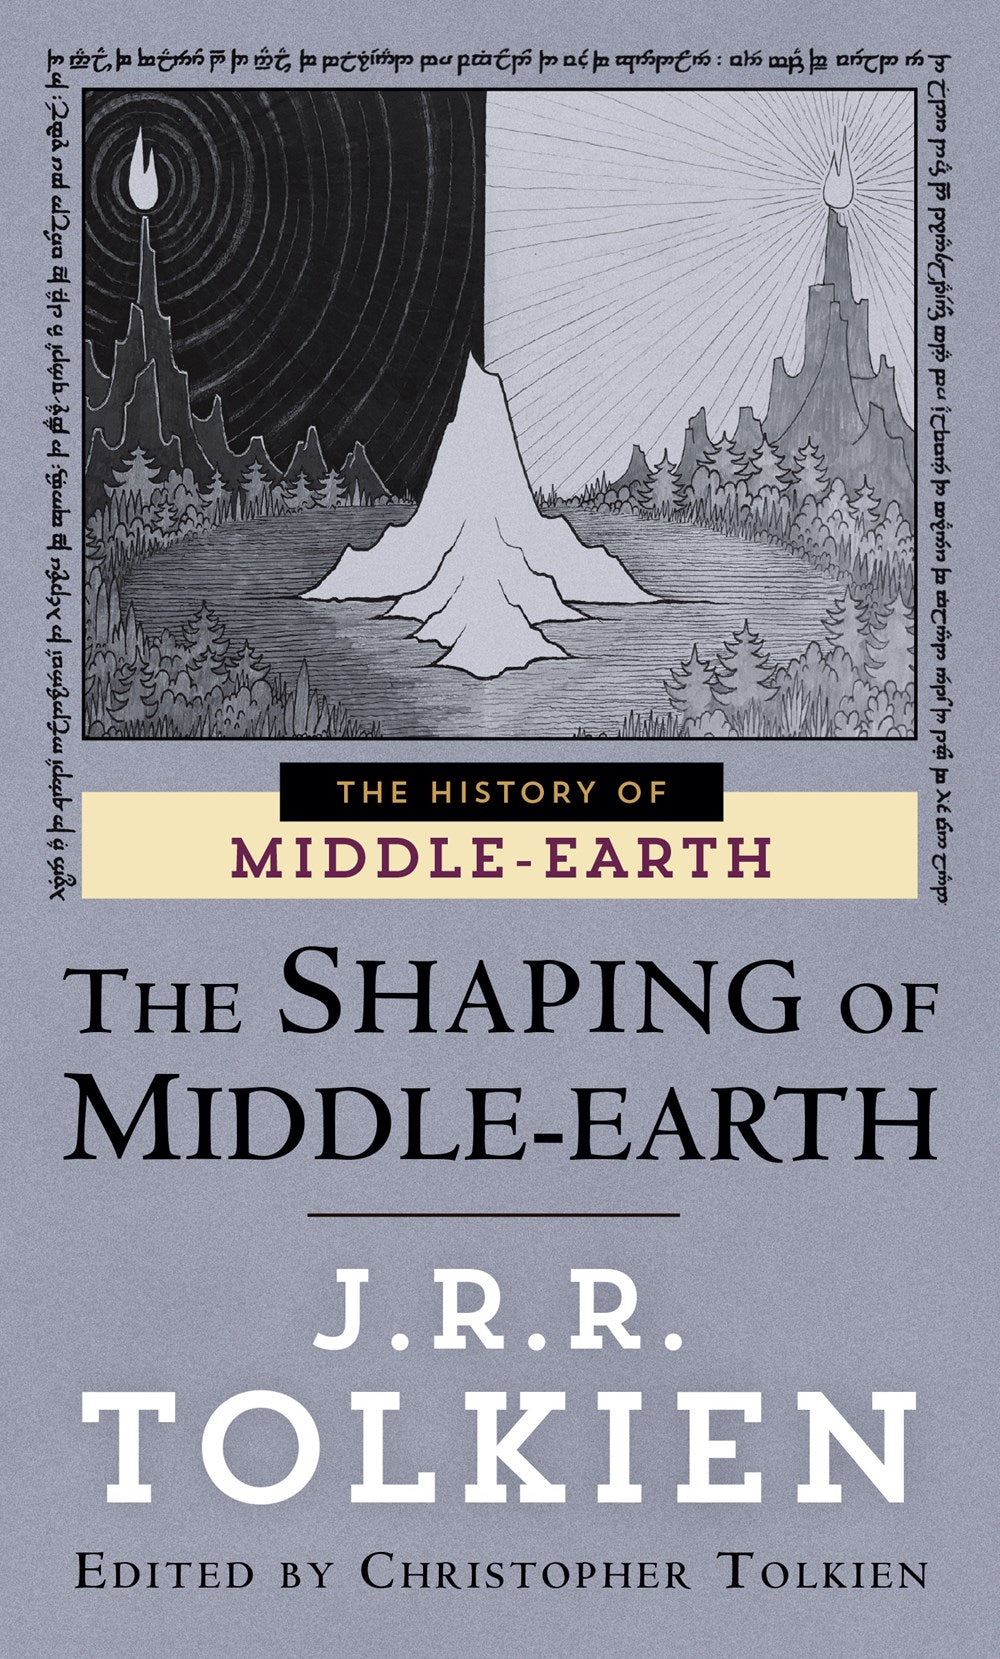 The Shaping of Middle-Earth (Histories of Middle-Earth #4)